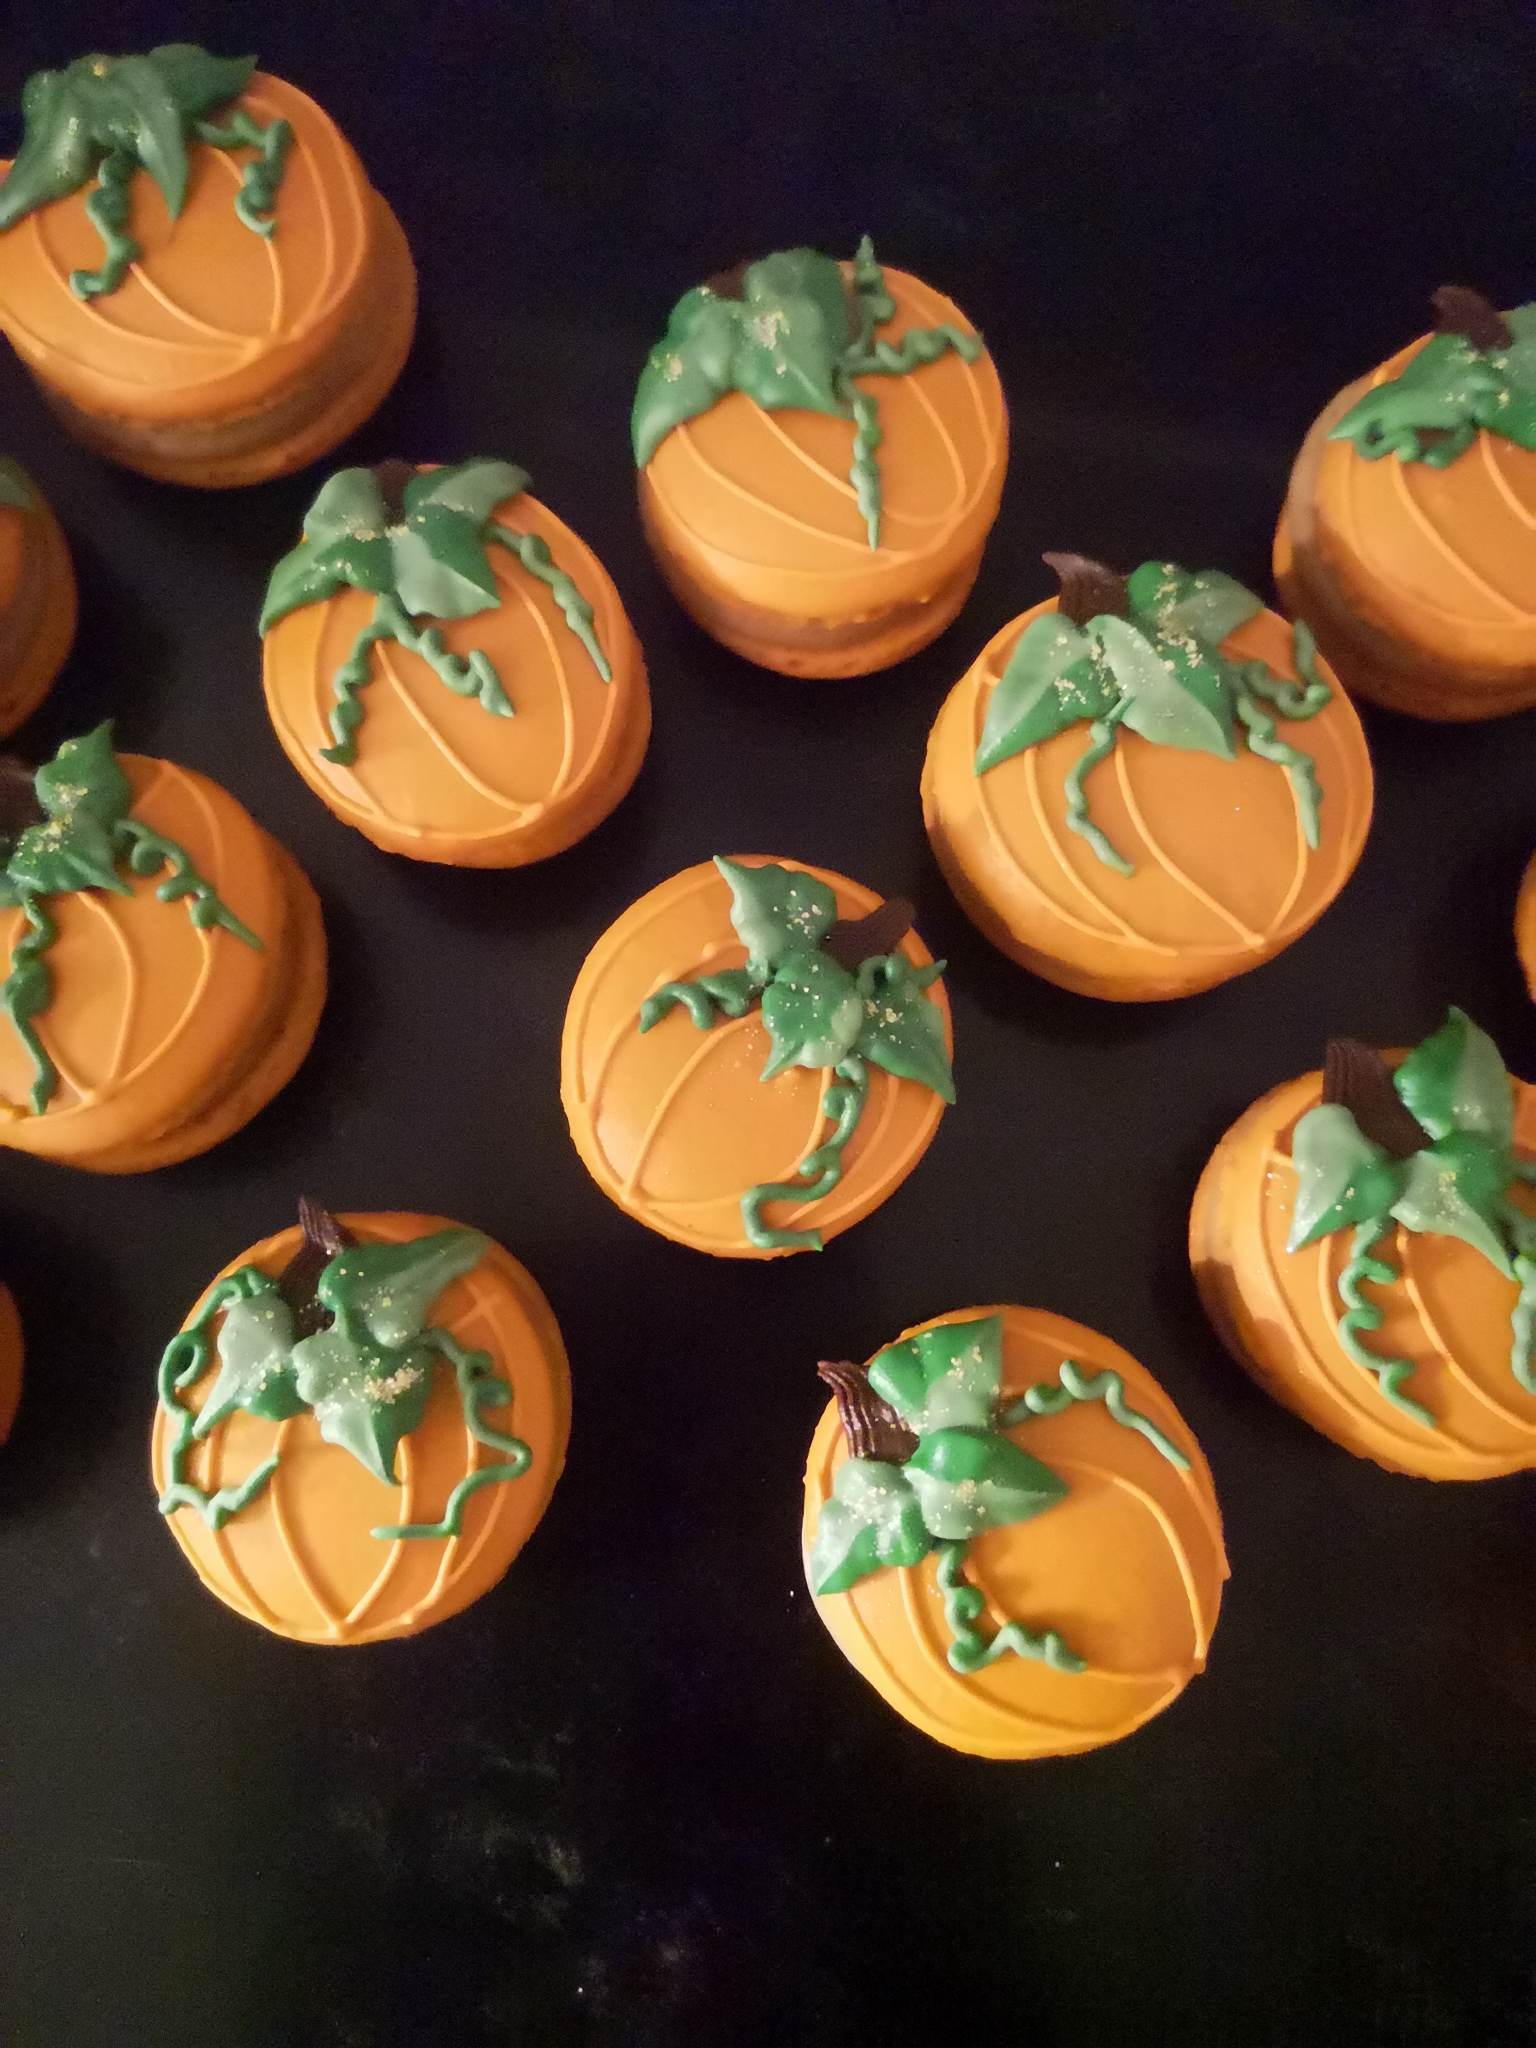 Set of Pumpkin Macarons with orange ganache and buttercream leaves